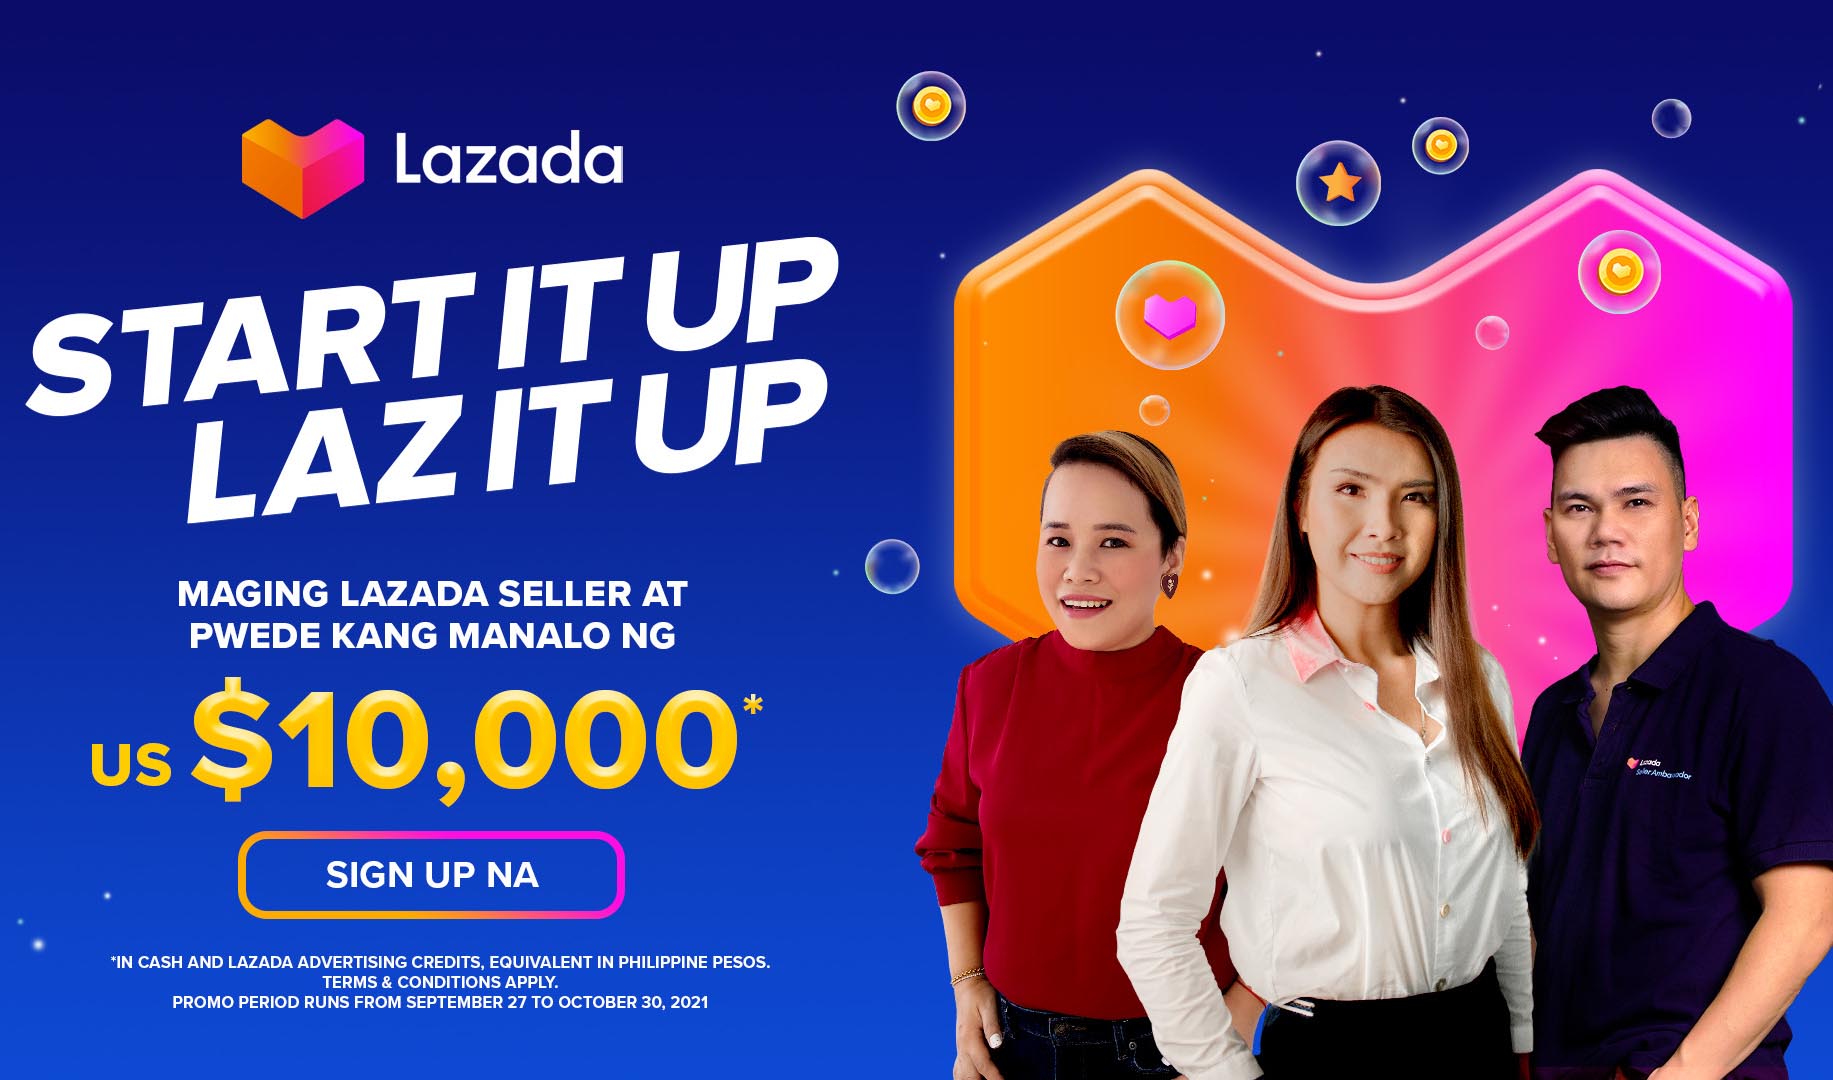 Lazada launches Start It Up, Laz It Up, an easy three-step seller registration sign-up